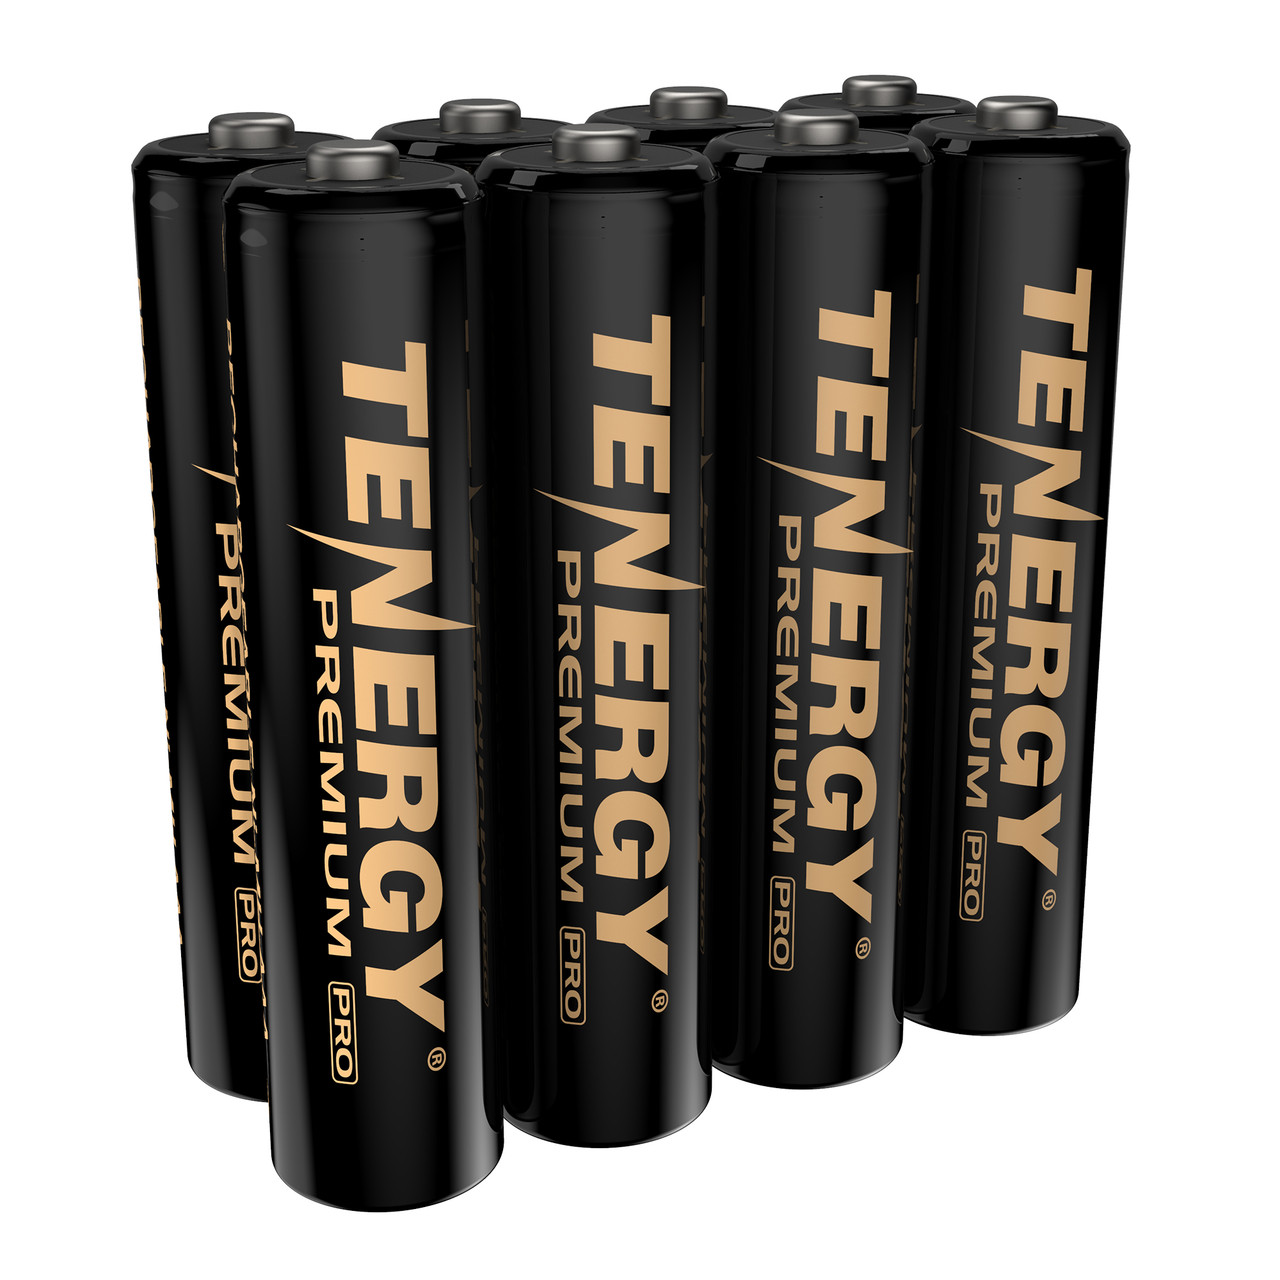 Tenergy Premium PRO Rechargeable AAA Batteries, High Capacity Low Self-Discharge 1100mAh NiMH AAA Battery, 8 Pack